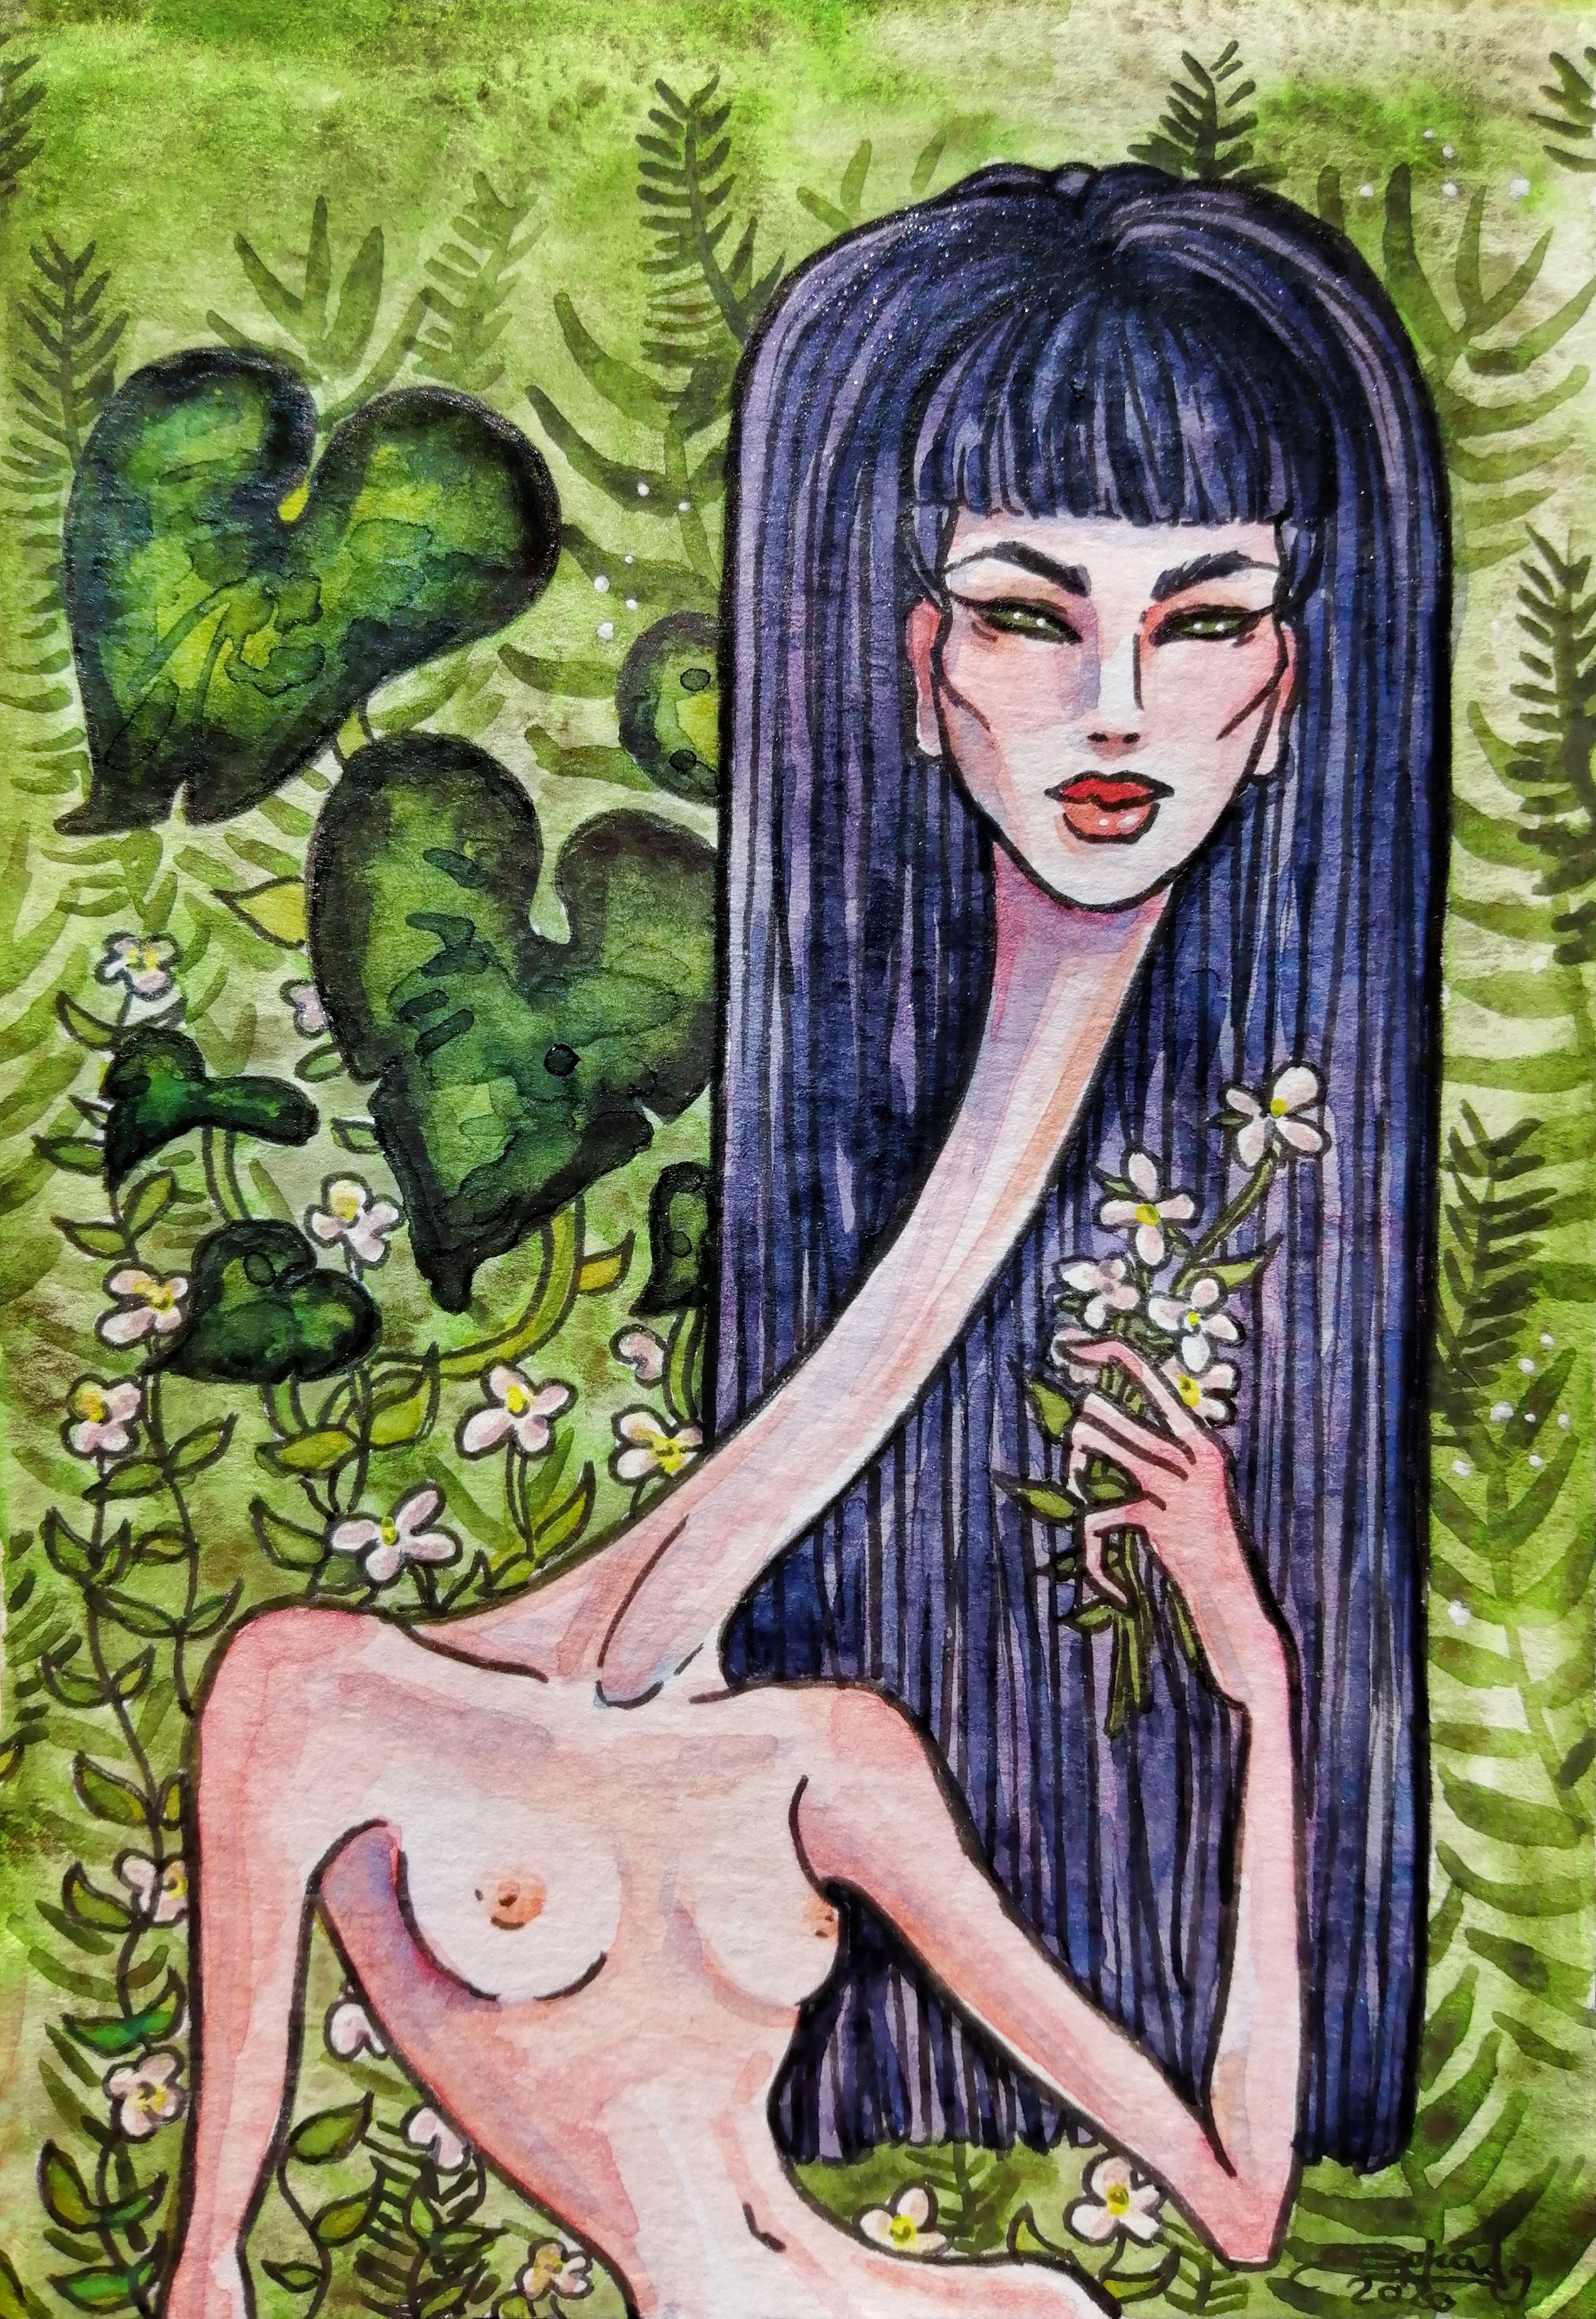 Noodle neck lady surrounded by green leaves and foliage